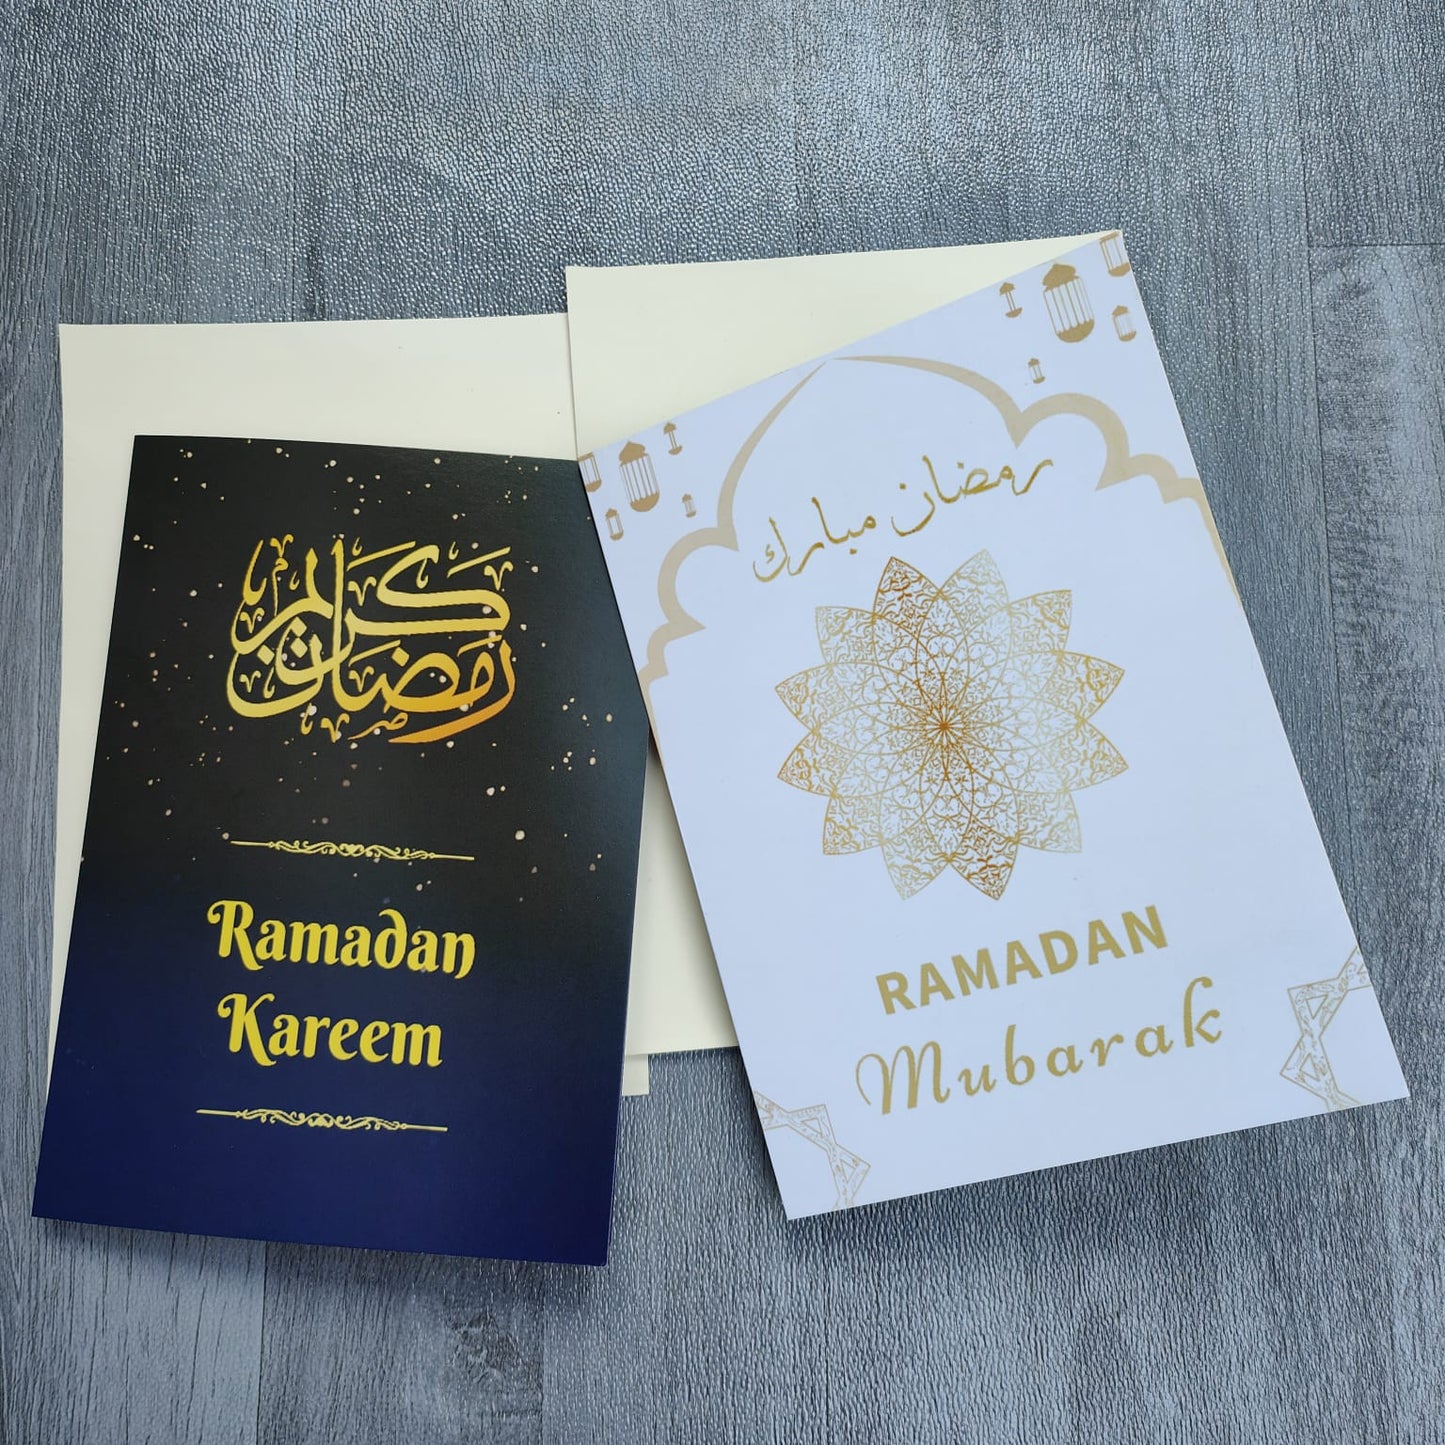 Ramadan Mubarak greeting card has a unique and elegant design, incorporating intricate patterns & colors. They are printed on high-quality paper, and feature thoughtful messages in Arabic motif and English. This greeting card provides a thoughtful and personal way to send greetings to friends and family for Ramadan. 